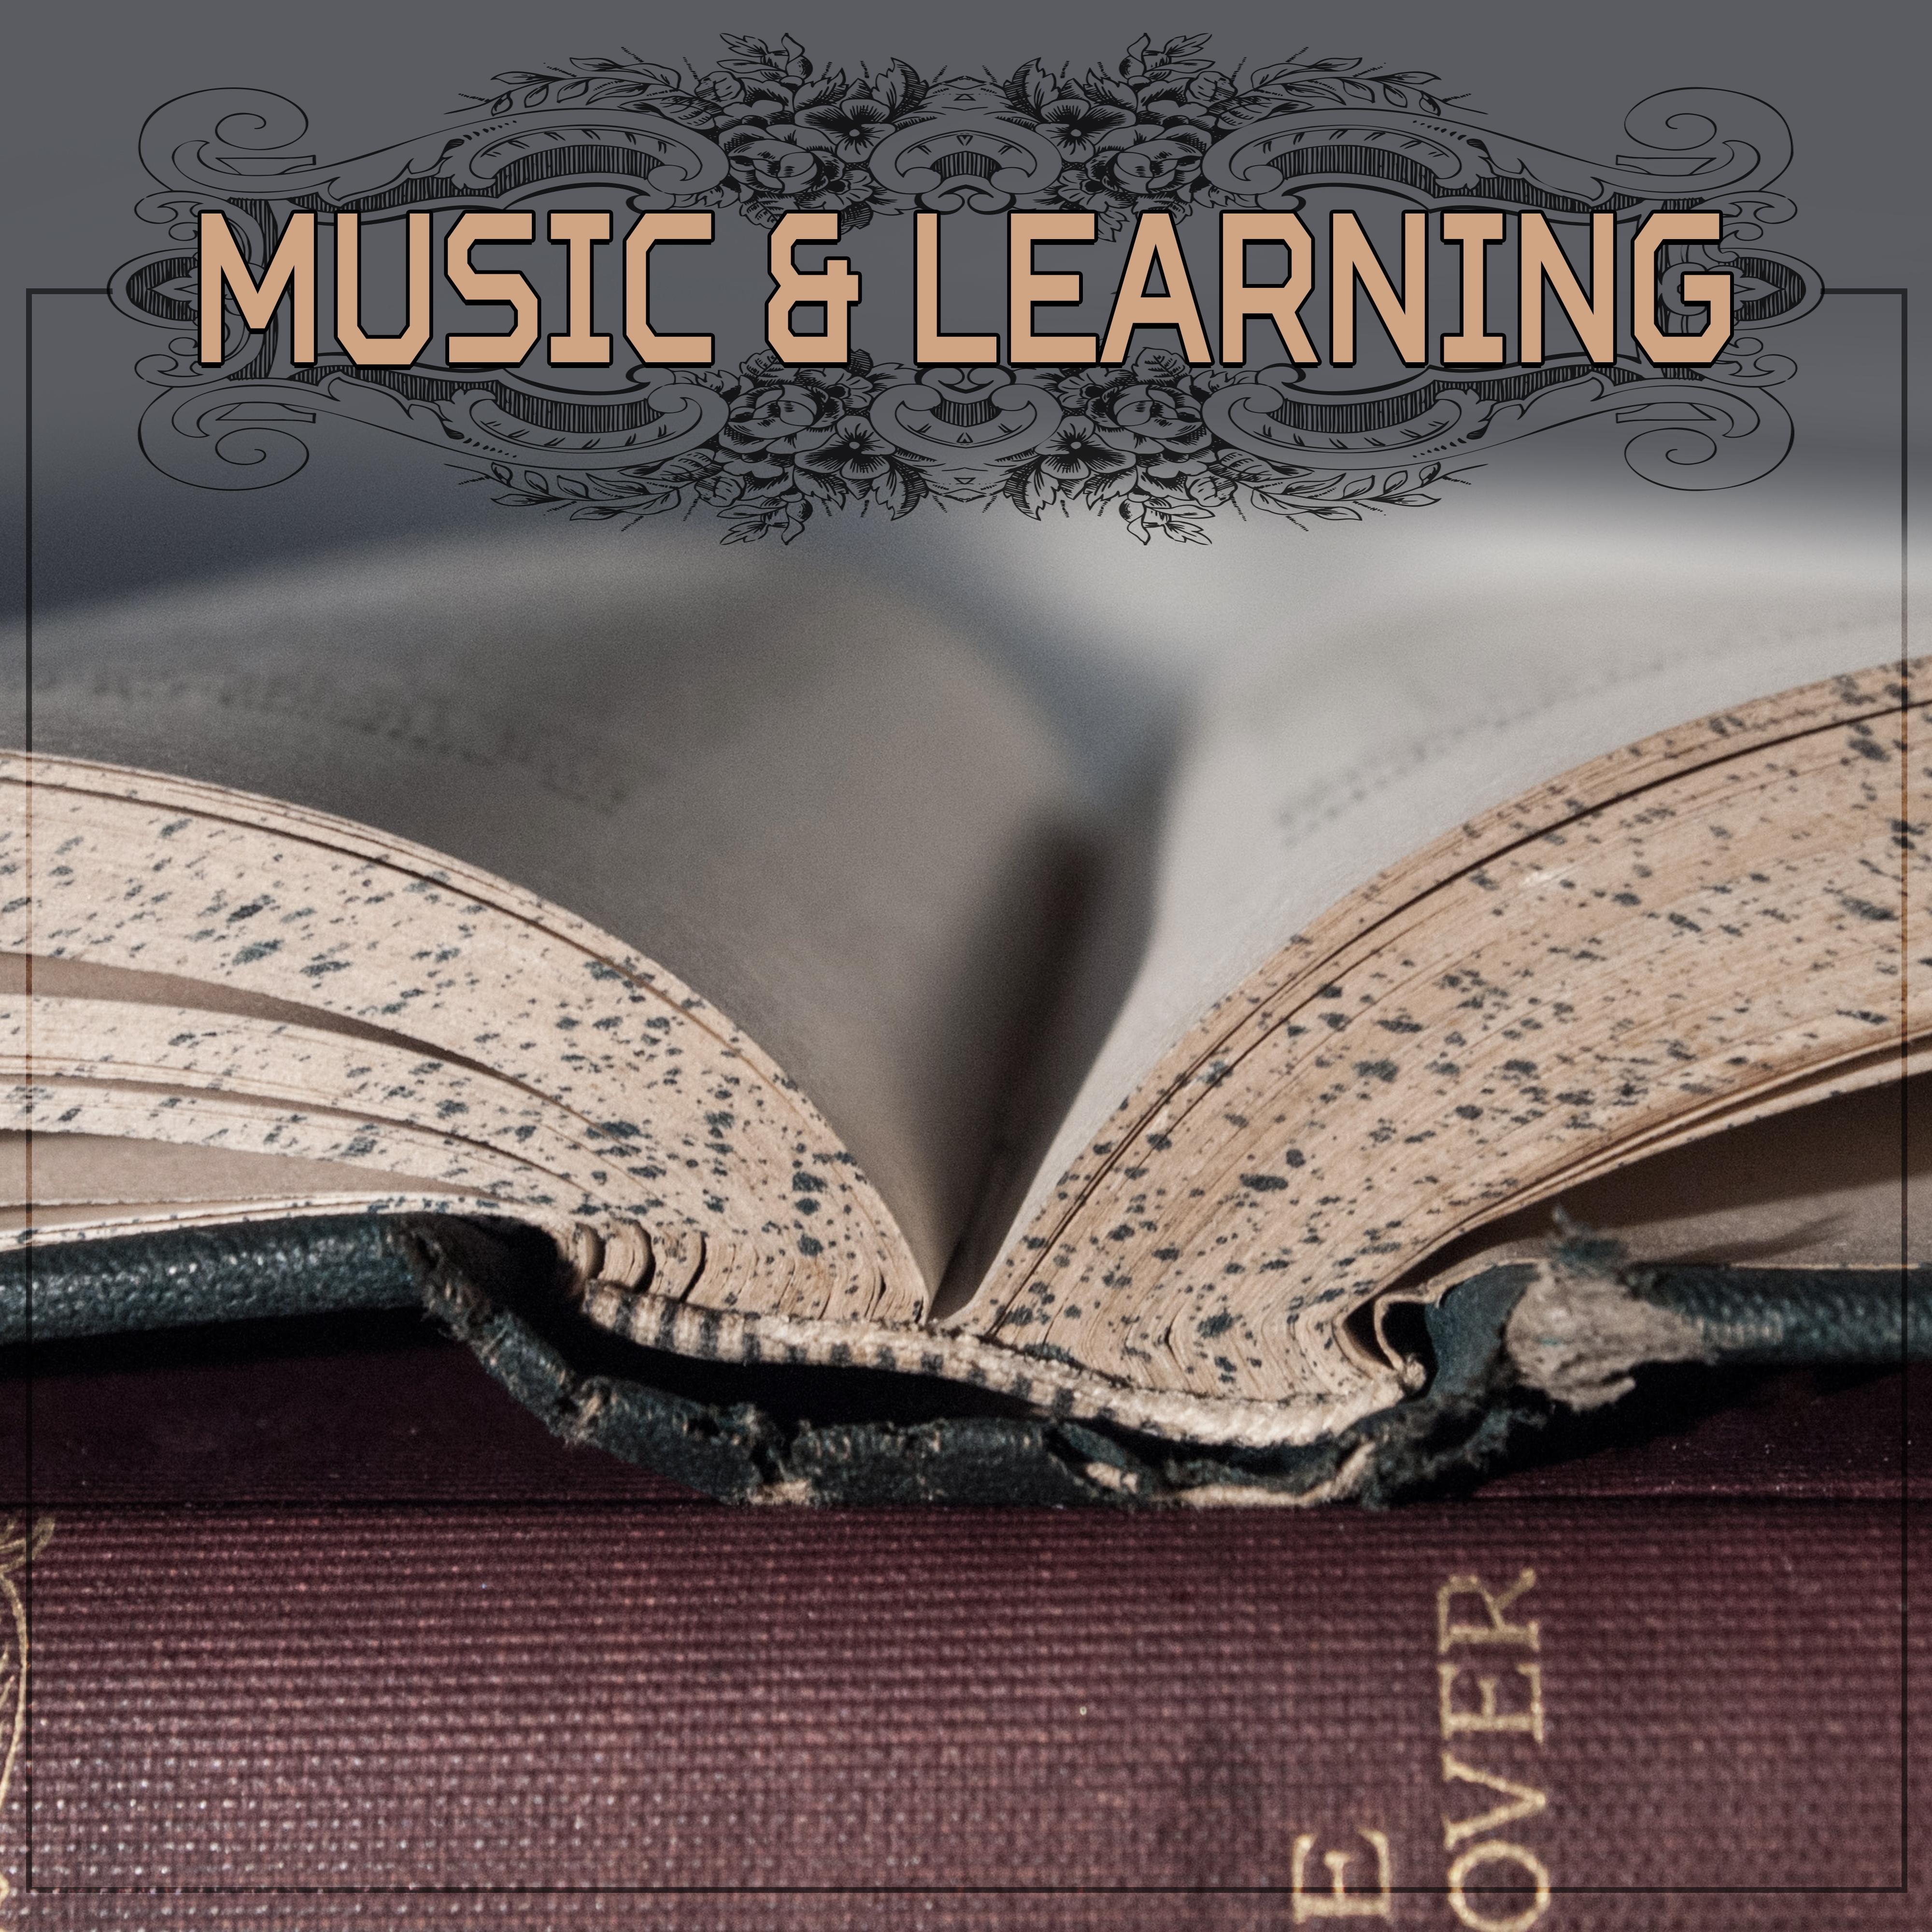 Music & Learning – Best Classical Music for Study, Stress Free, Better Memory, Focus with Composers